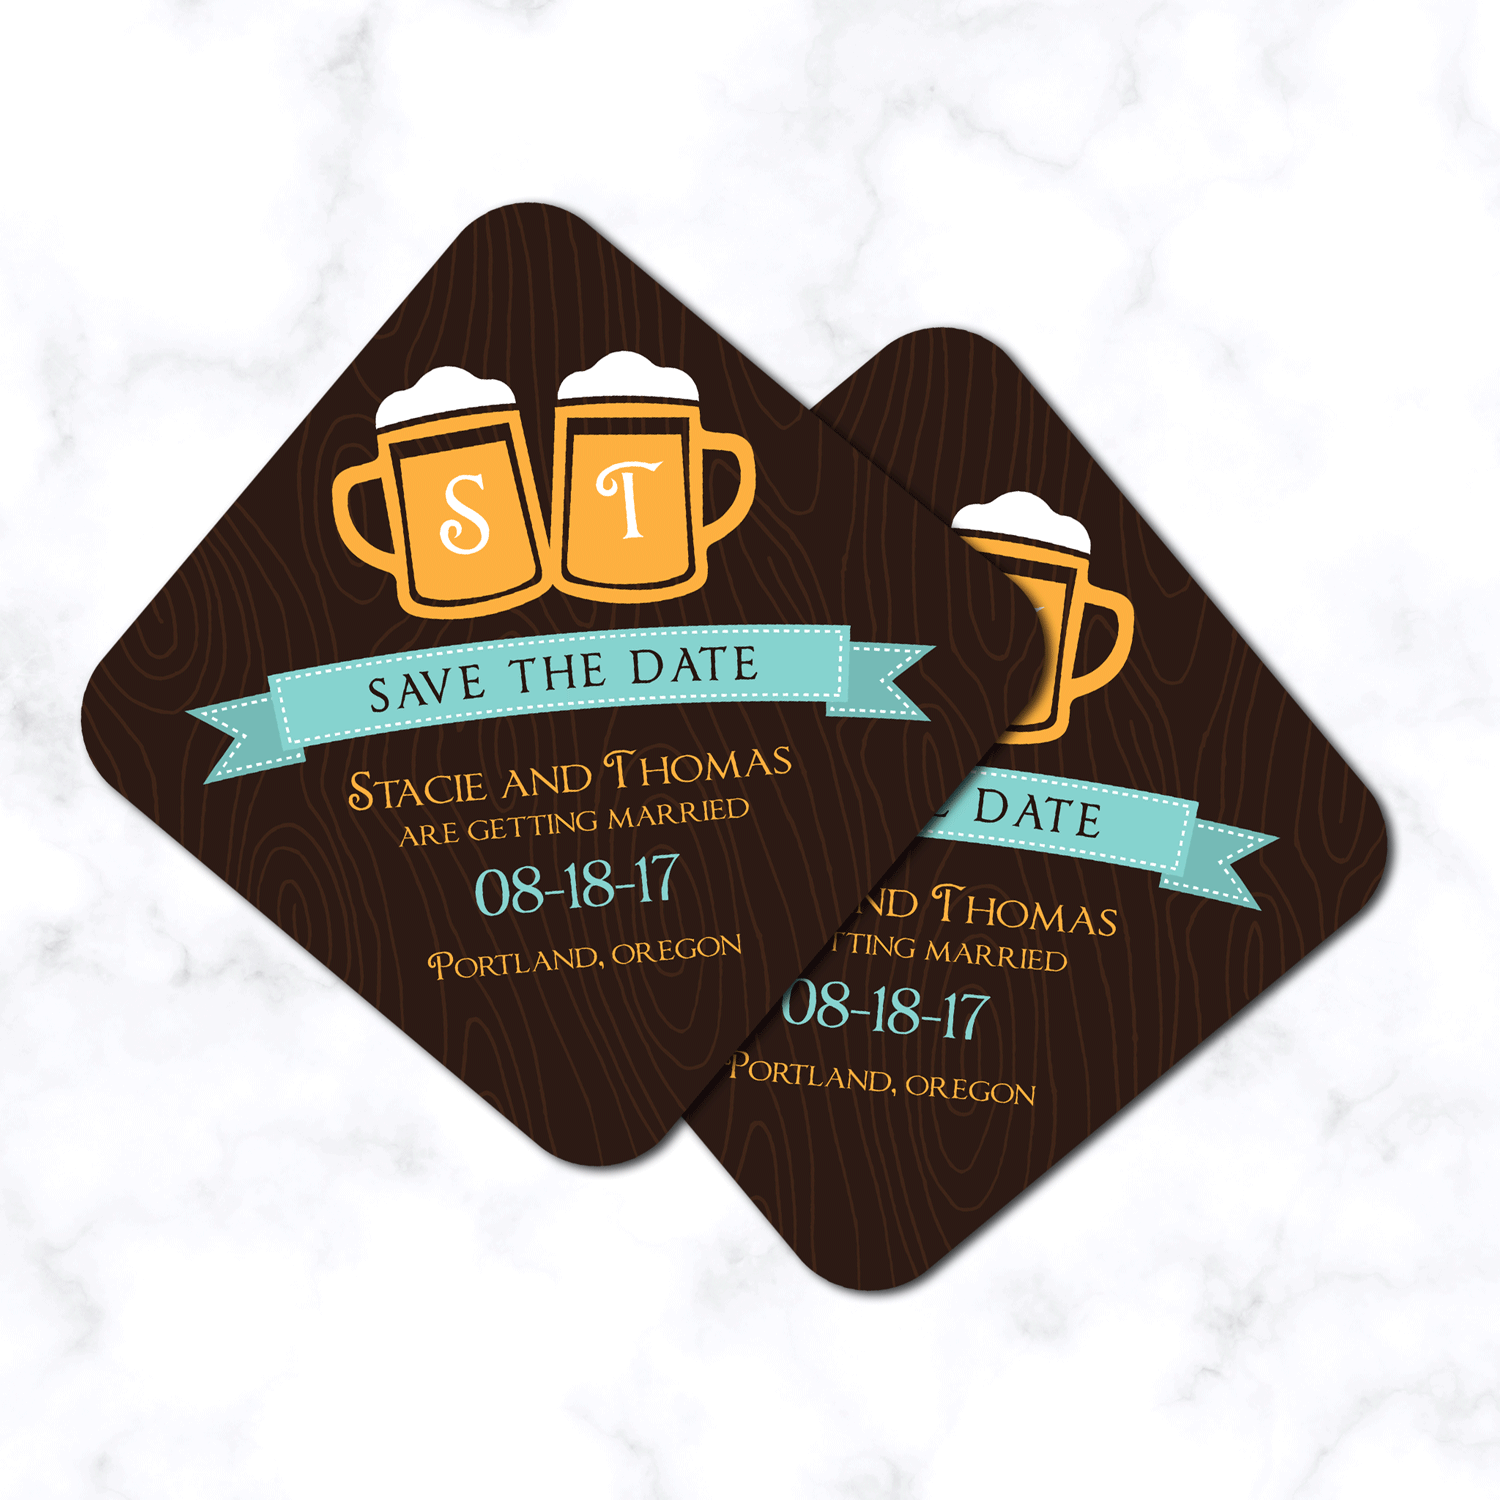 Beer Themed Save the Date Coasters - Unique Wedding Save the Date Coasters - 4x4 with Rounded Corners